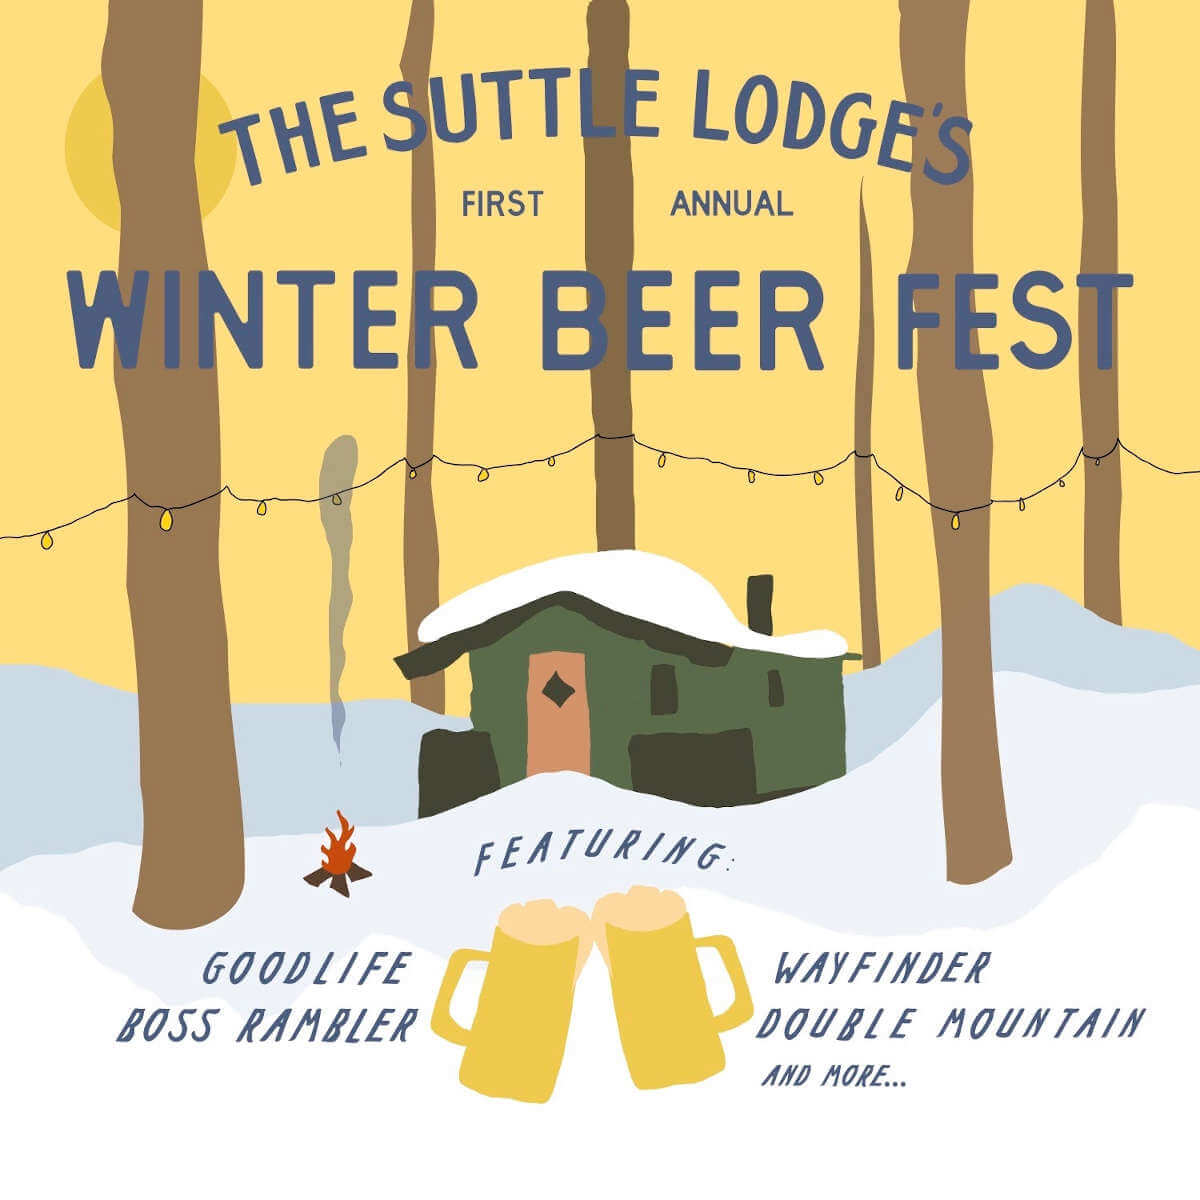 The Suttle Lodge is hosting its first Winter Beer Fest starting January 30